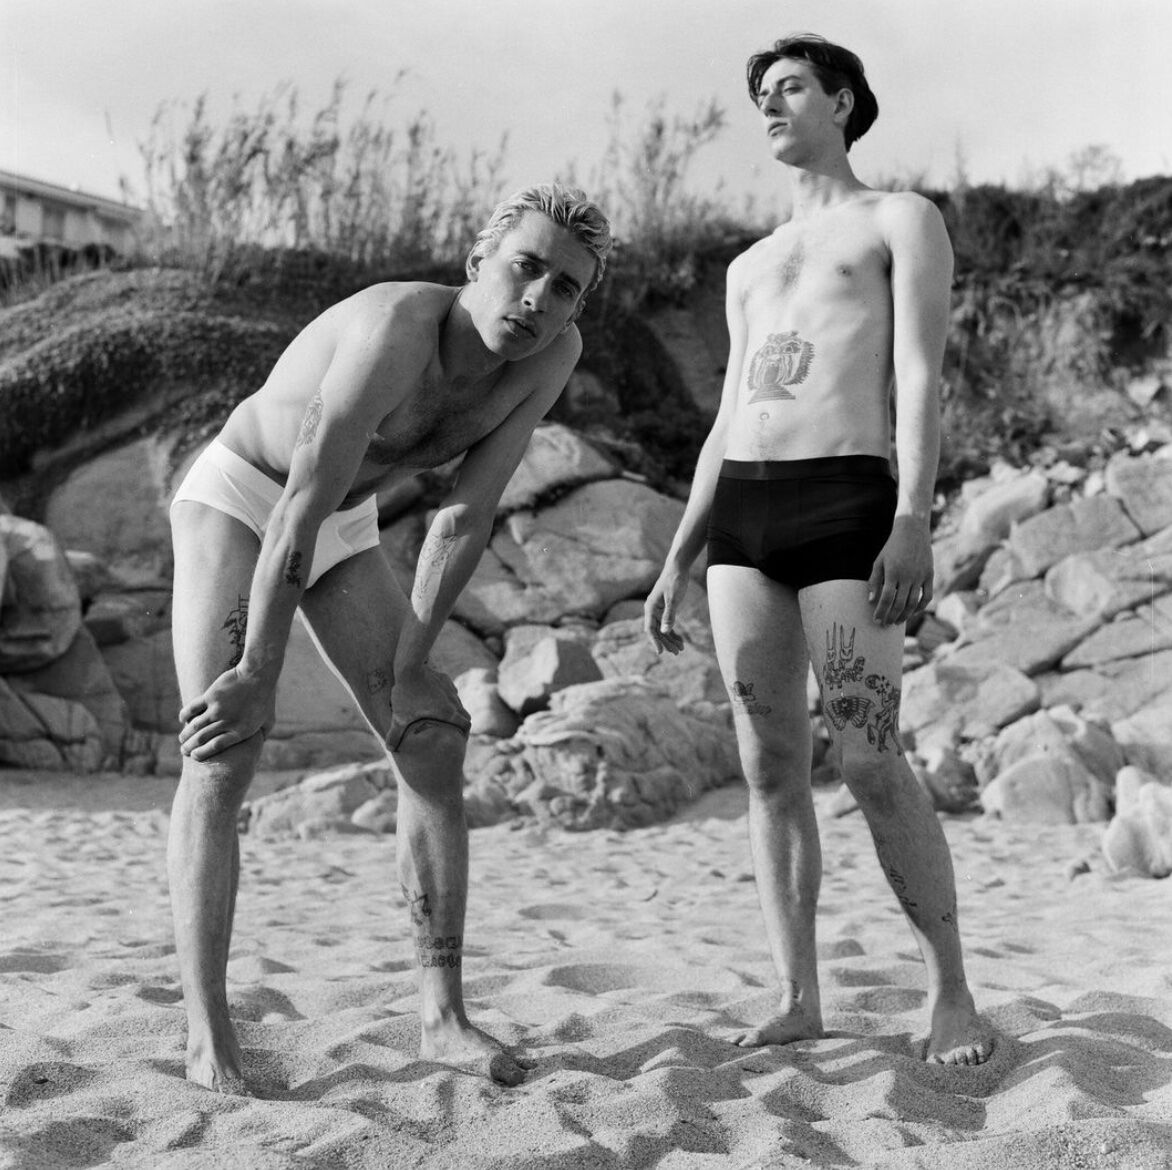 Two men with tattoos standing on the beach in the best boxer briefs